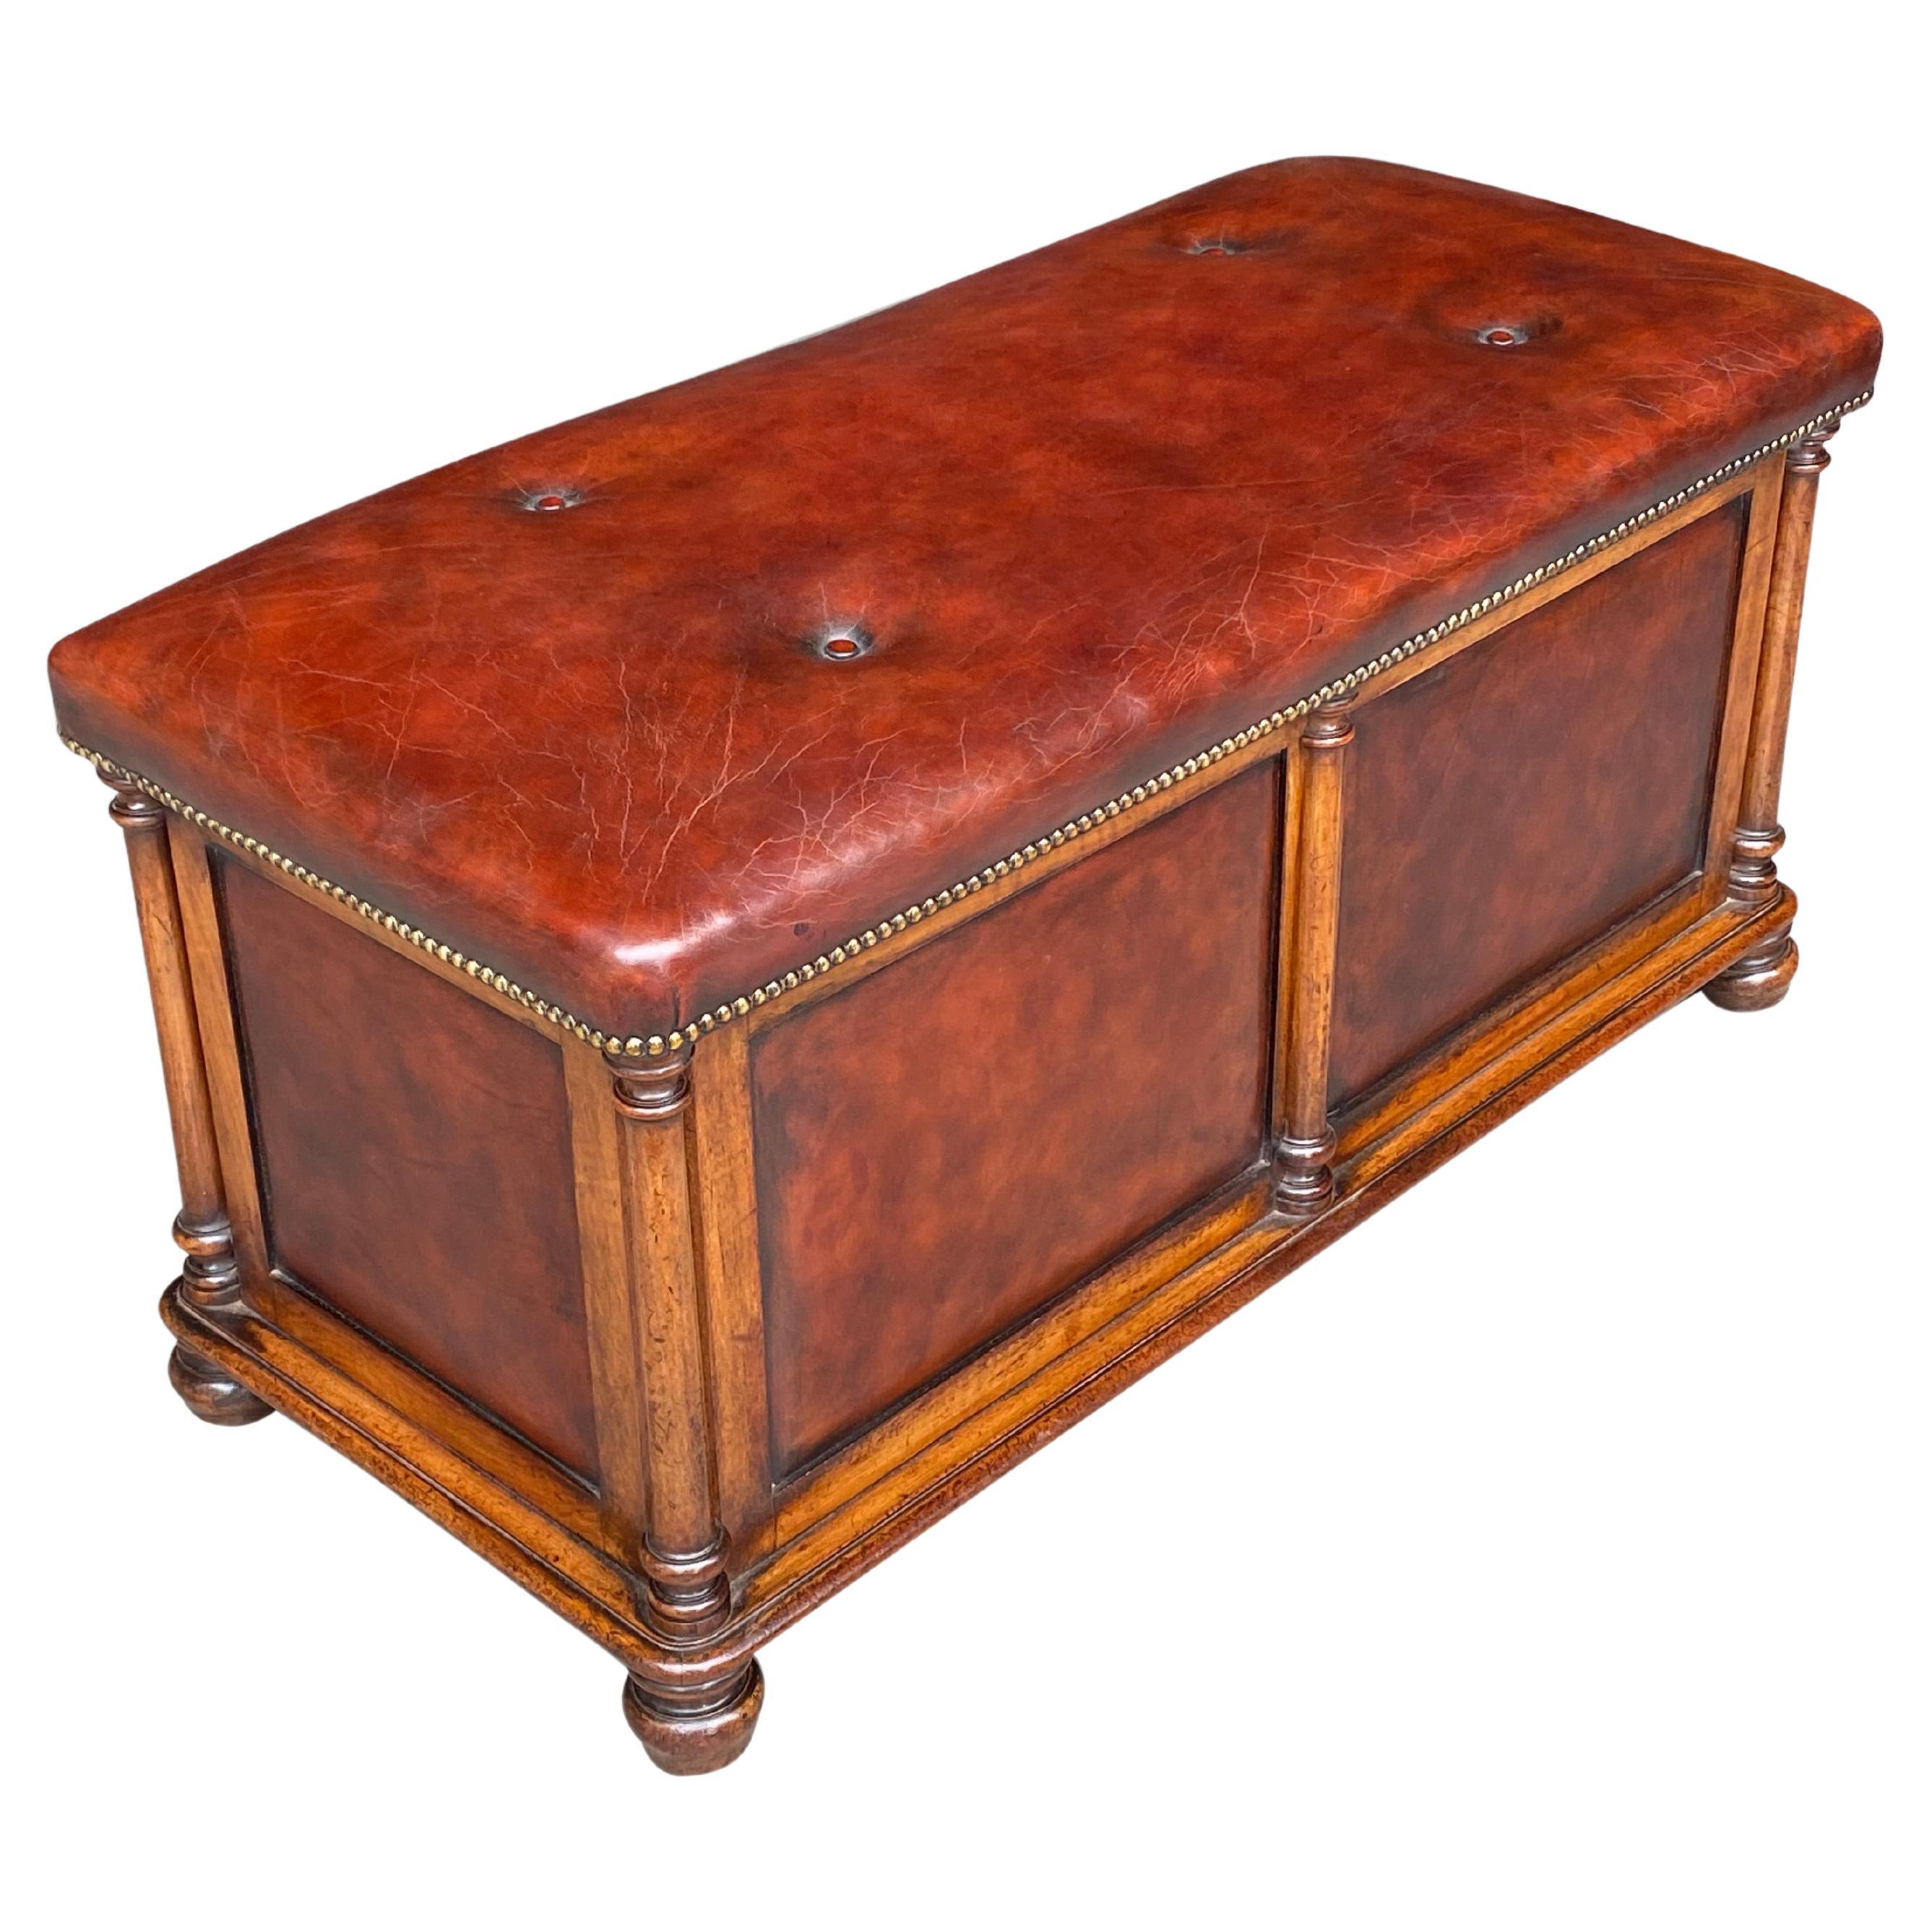 19th Century, William IV Period Walnut and Leather Ottoman For Sale